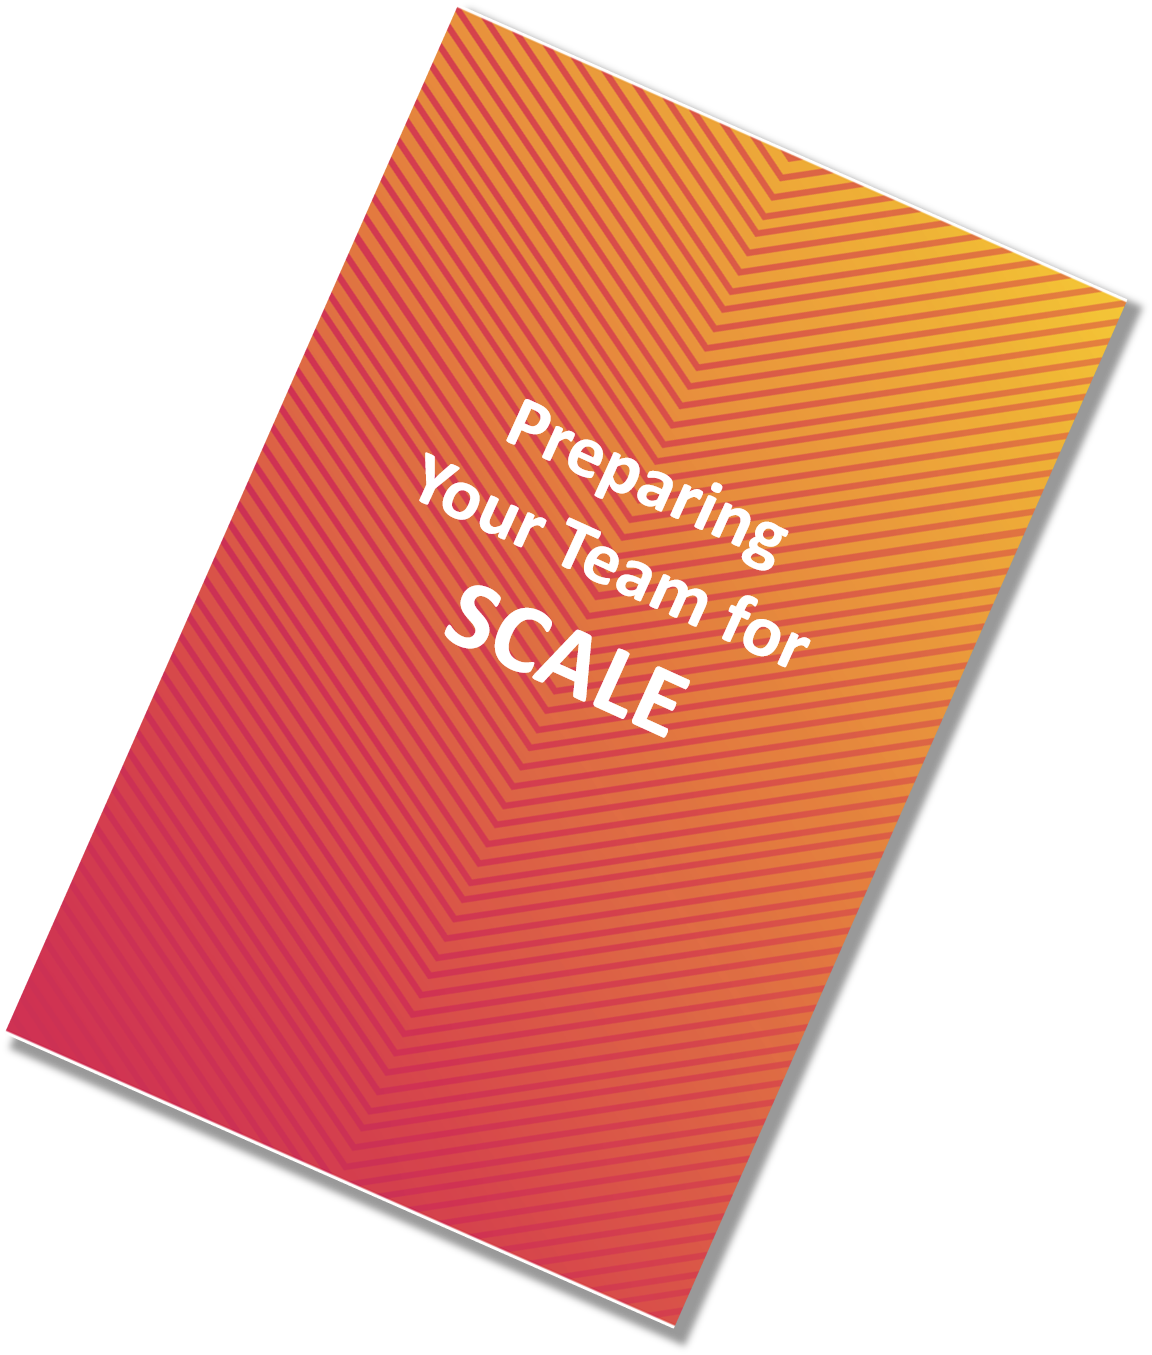 Preparing your team for scaling